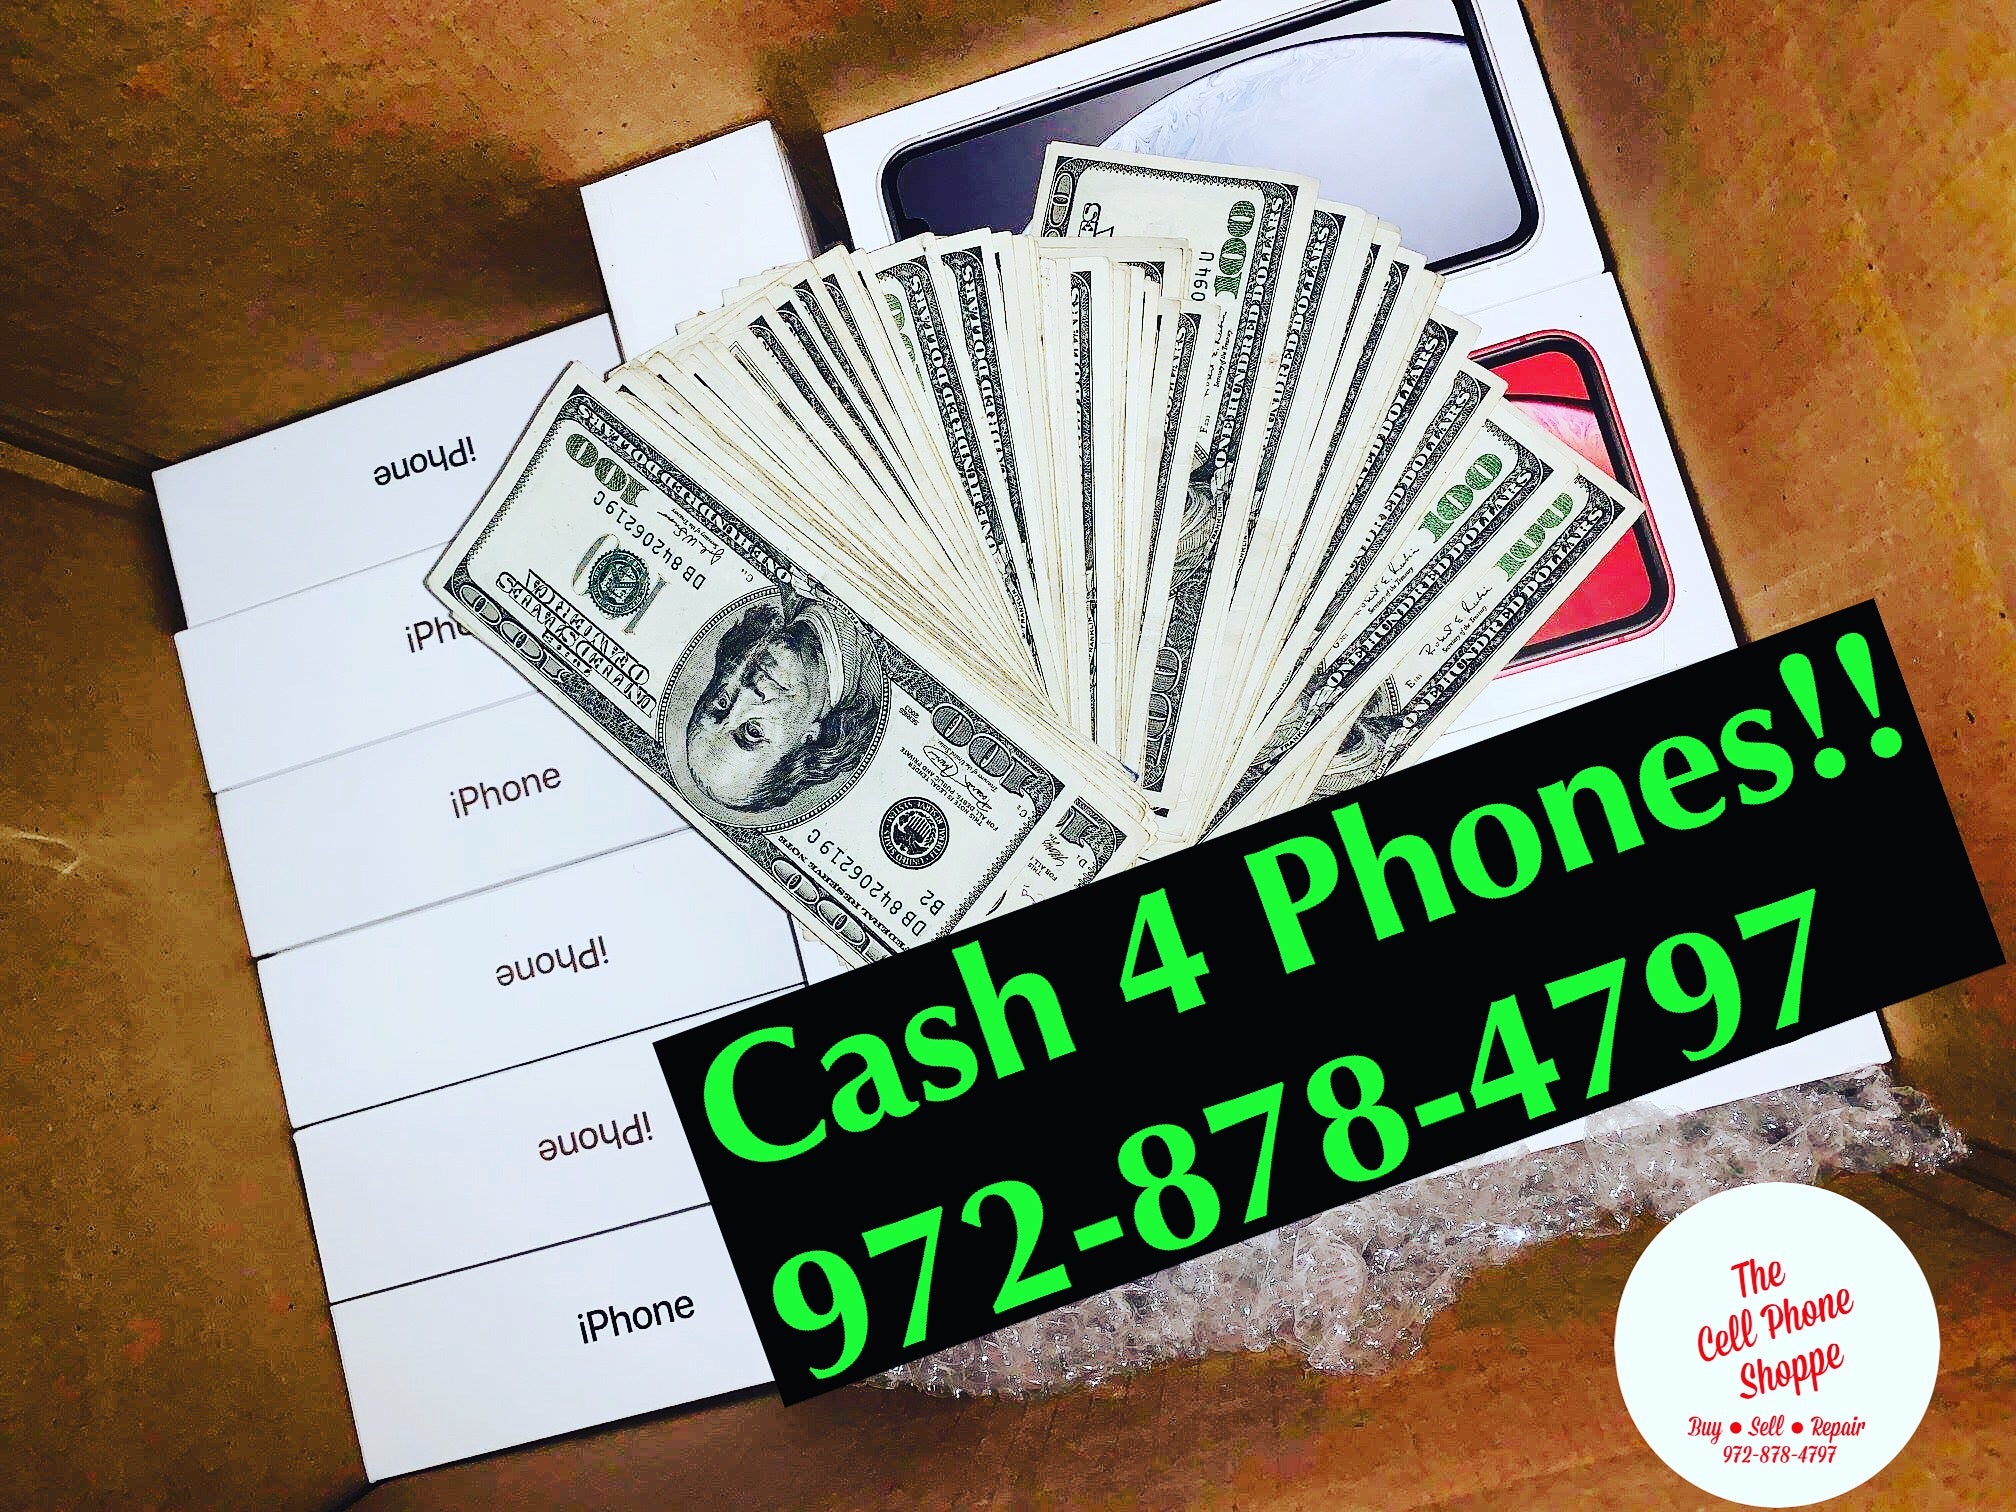 Are you wondering where you can sell your phone for a good price? We pay cash for your iPhones and Samsung Phones